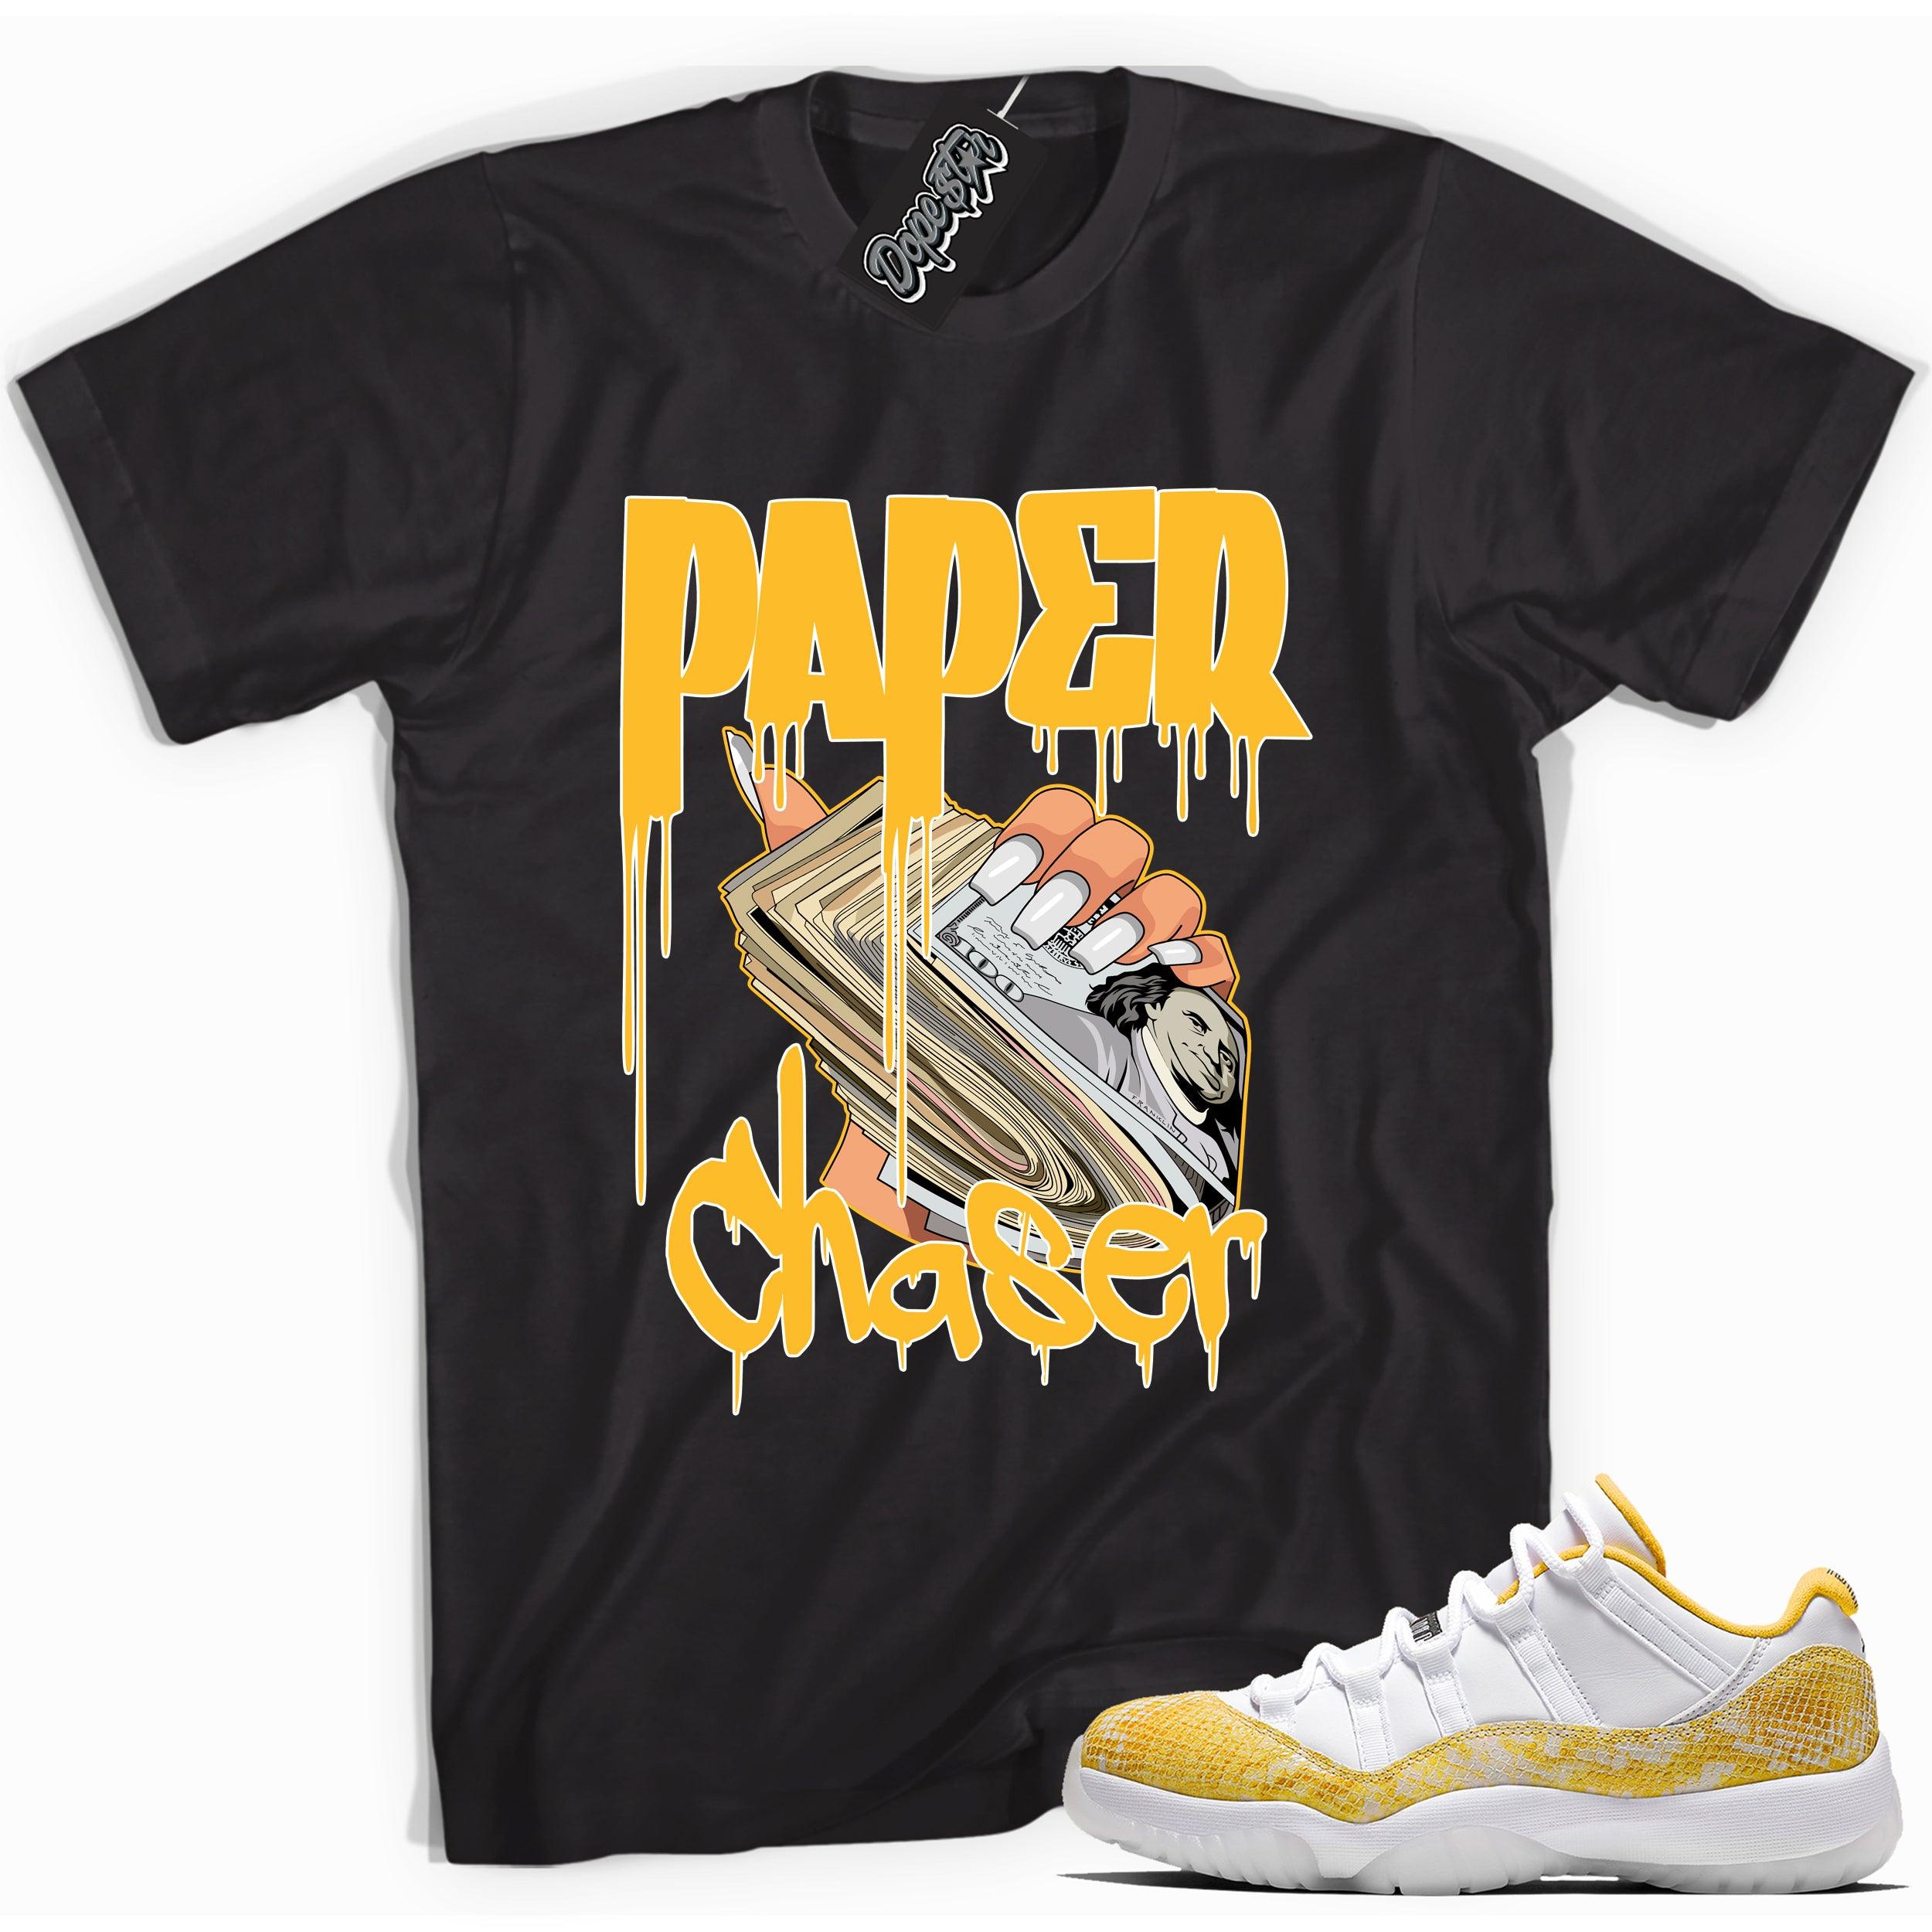 Cool black graphic tee with 'paper chaser' print, that perfectly matches  Air Jordan 11 Retro Low Yellow Snakeskin sneakers